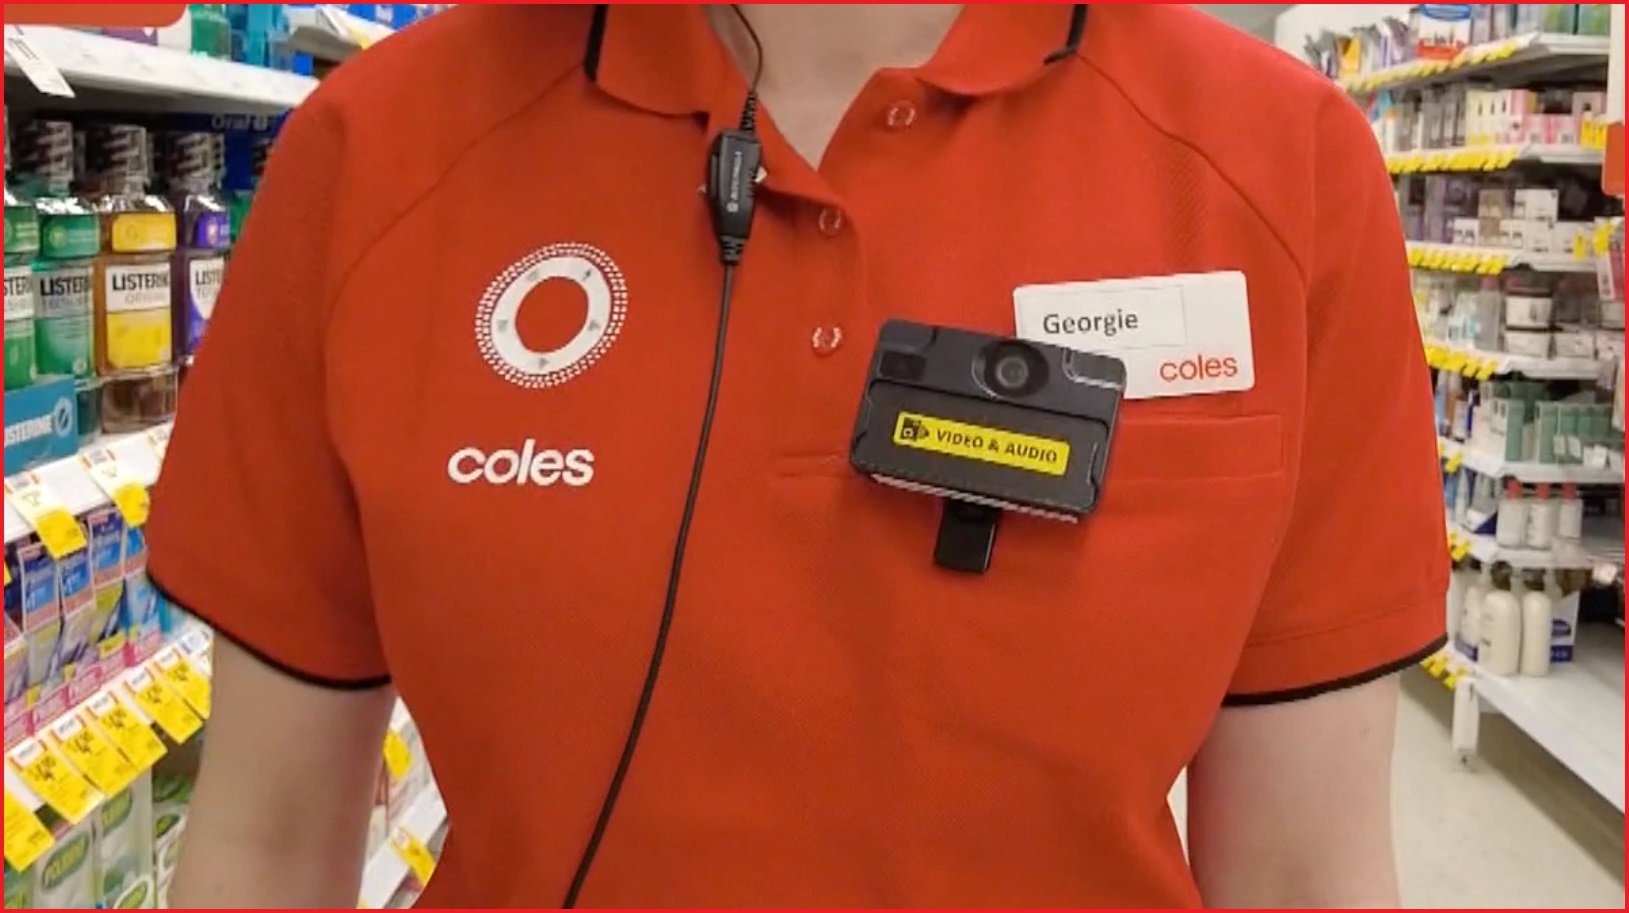 Woolworths trials staff worn body cameras after abuse reports